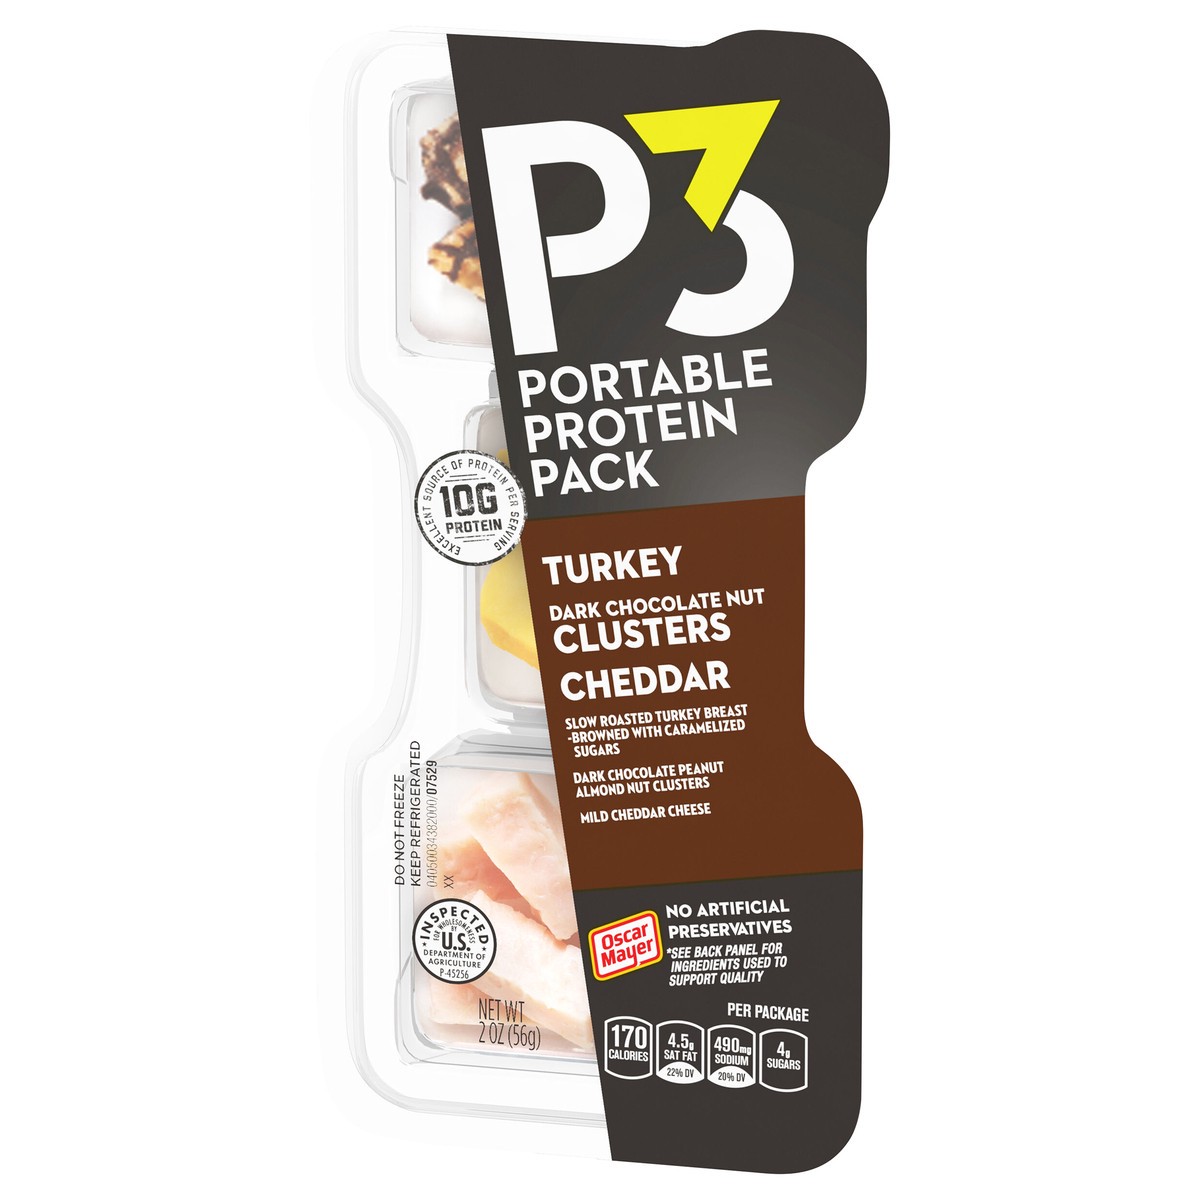 slide 7 of 9, P3 Portable Protein Pack Portable Protein Snack Pack with Dark Chocolate Almond Nut Clusters, Turkey & Cheddar Cheese - 2oz, 2 oz